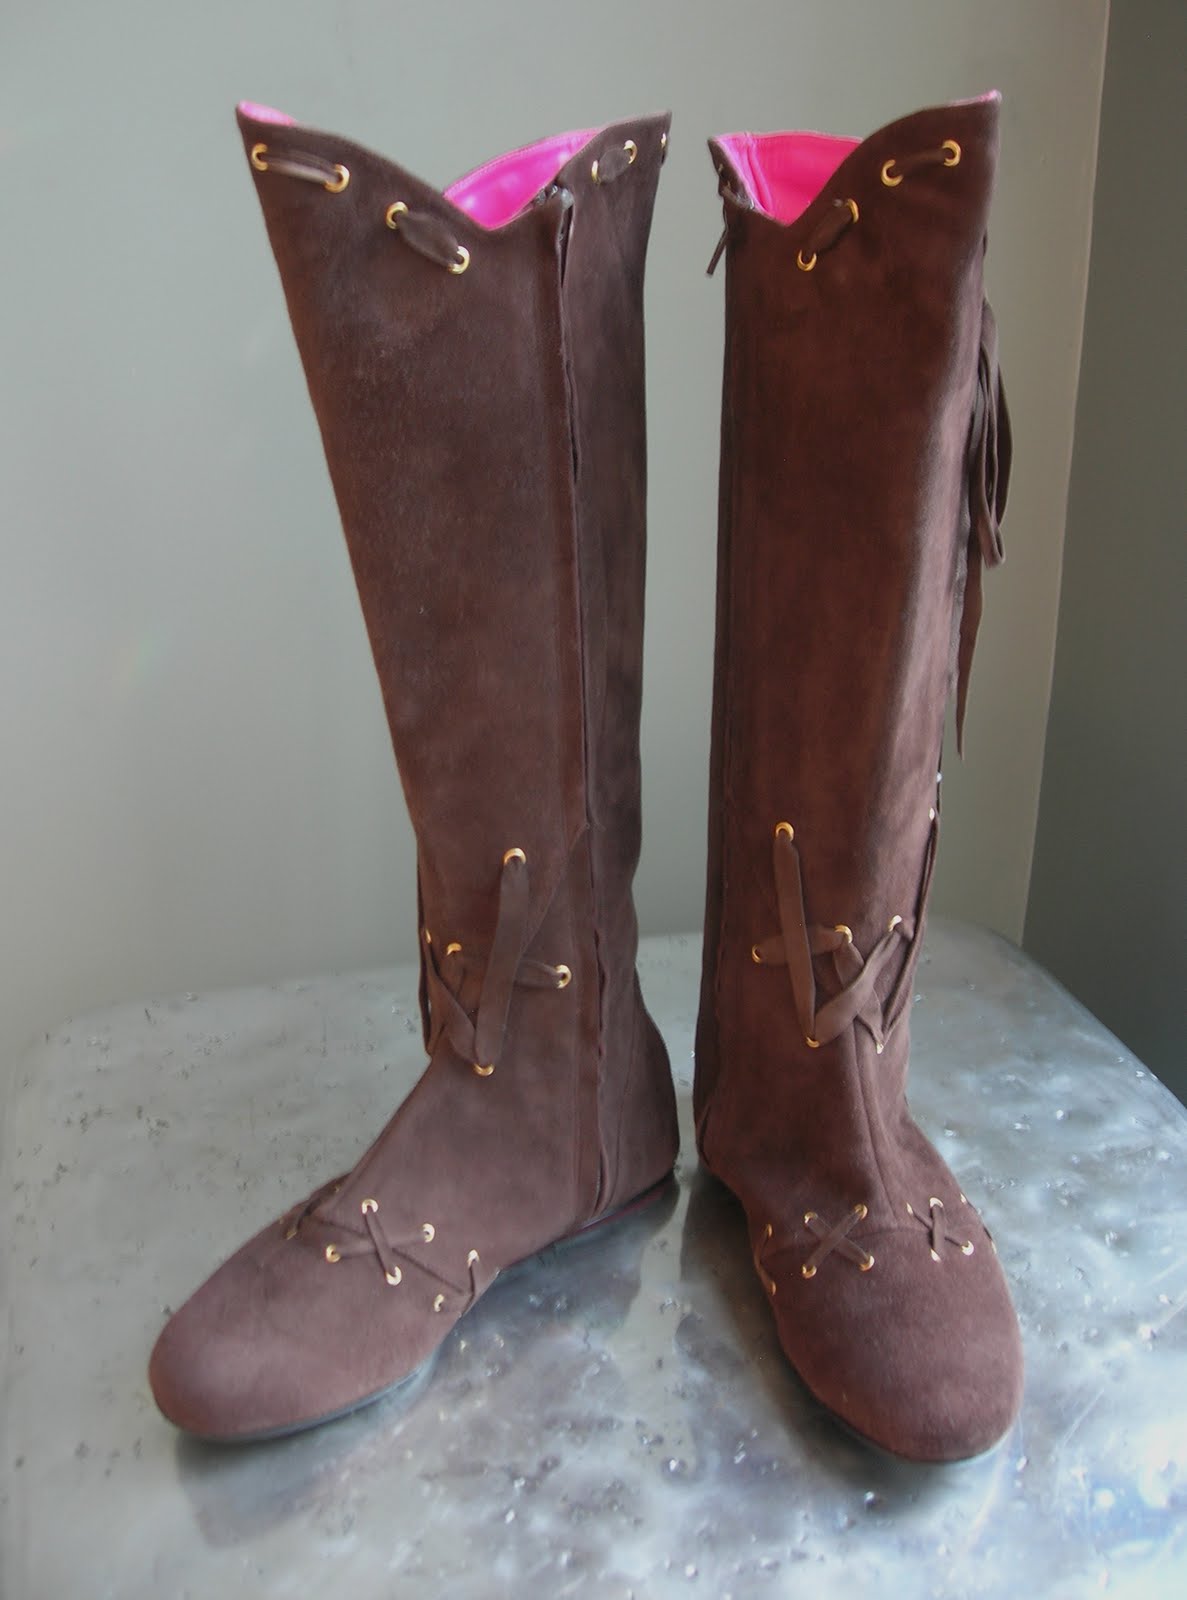 Bien Vestido: My Most Expensive Pair of Boots